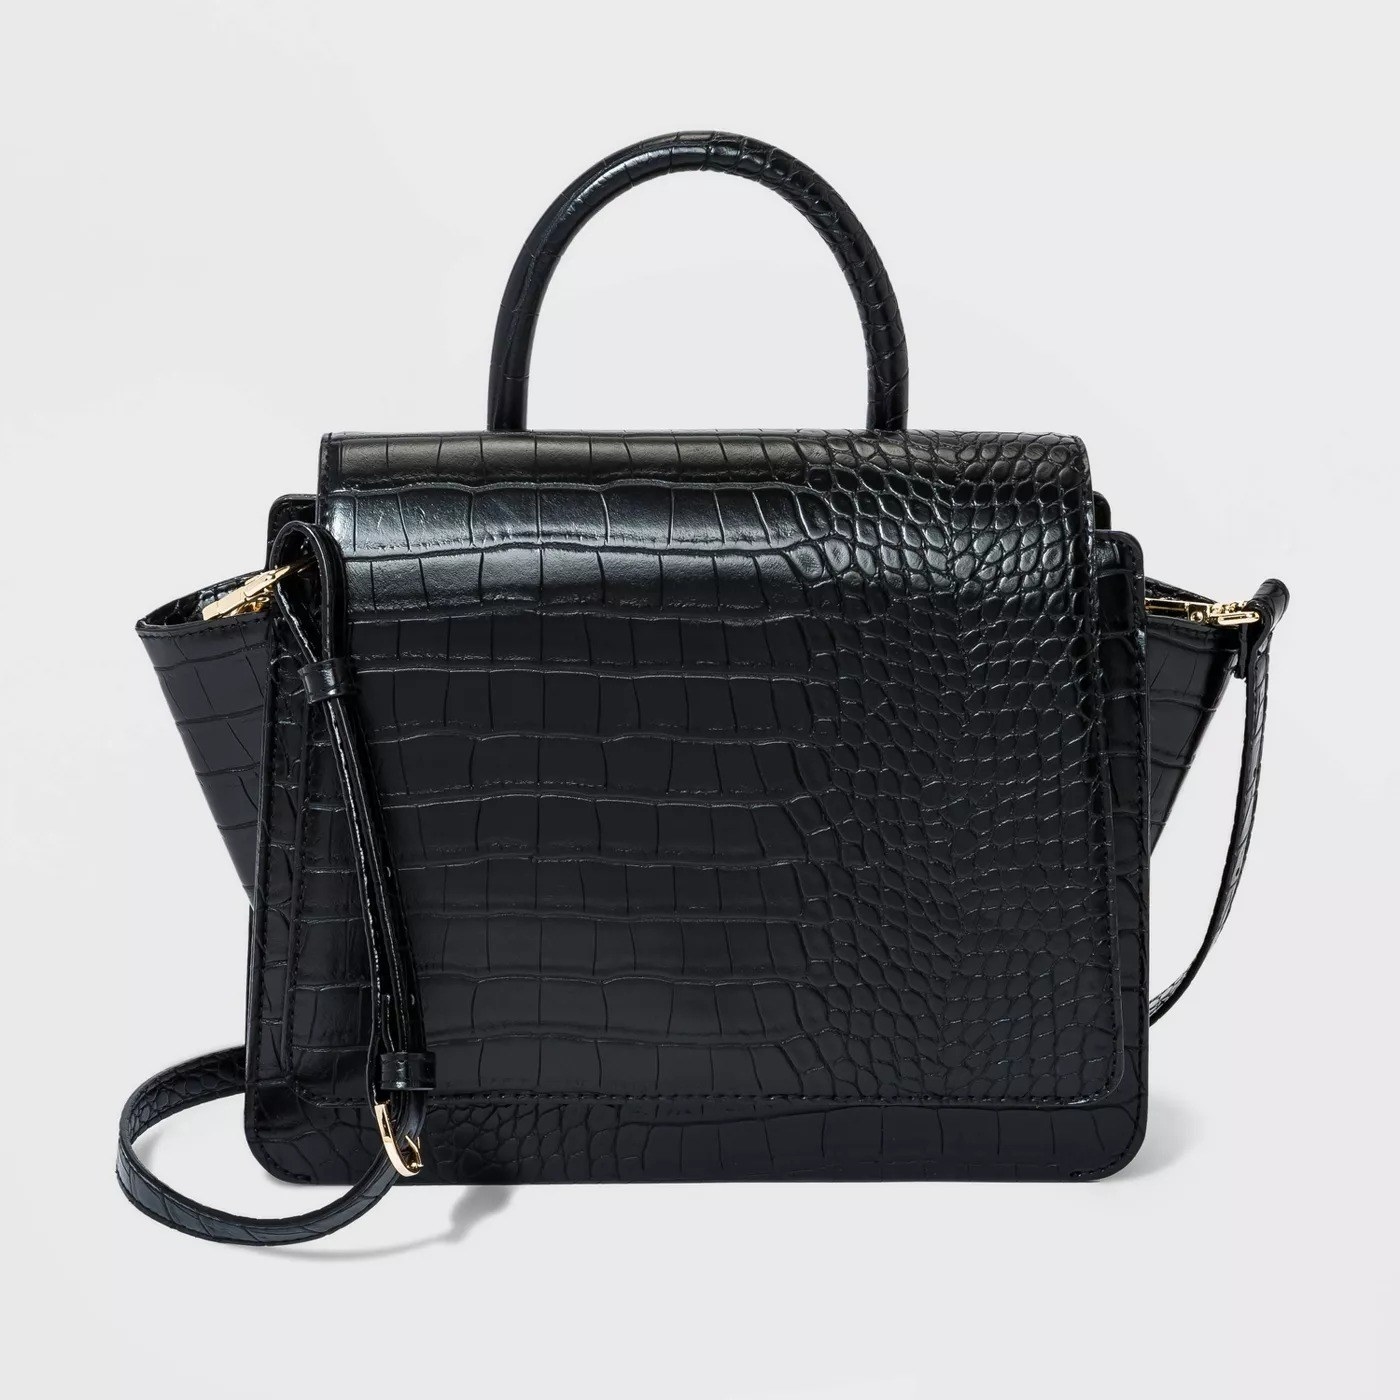 The black bag with  texture and top handle